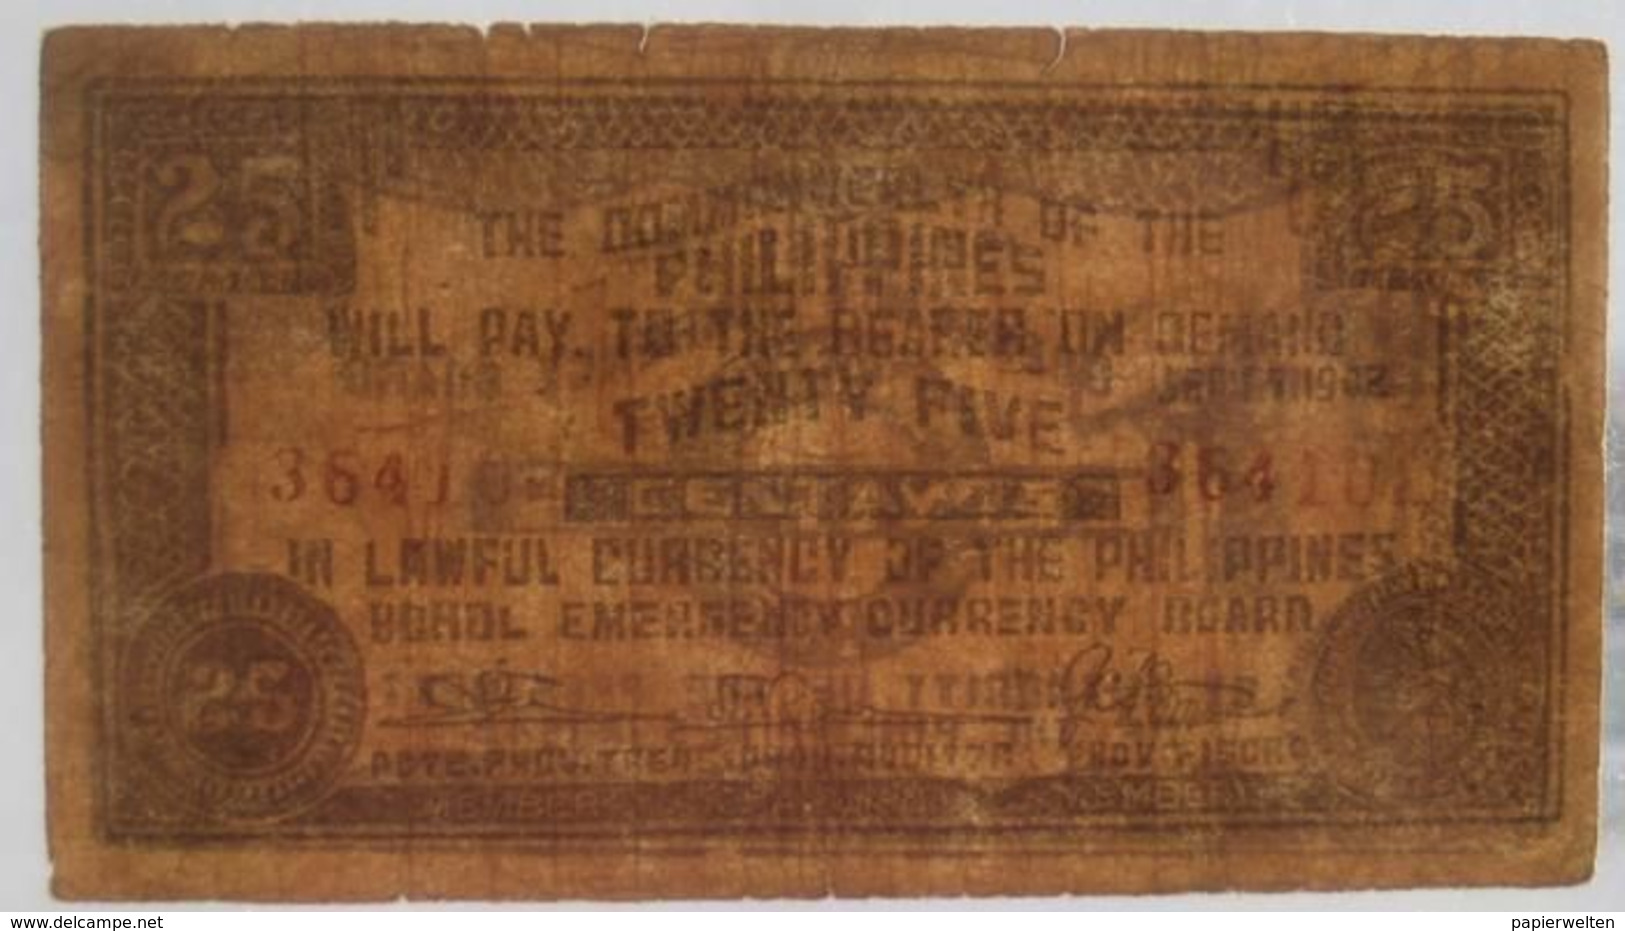 25 Centavos 1942 Bohol Emergency Currency Board (WPM S133) - Philippines